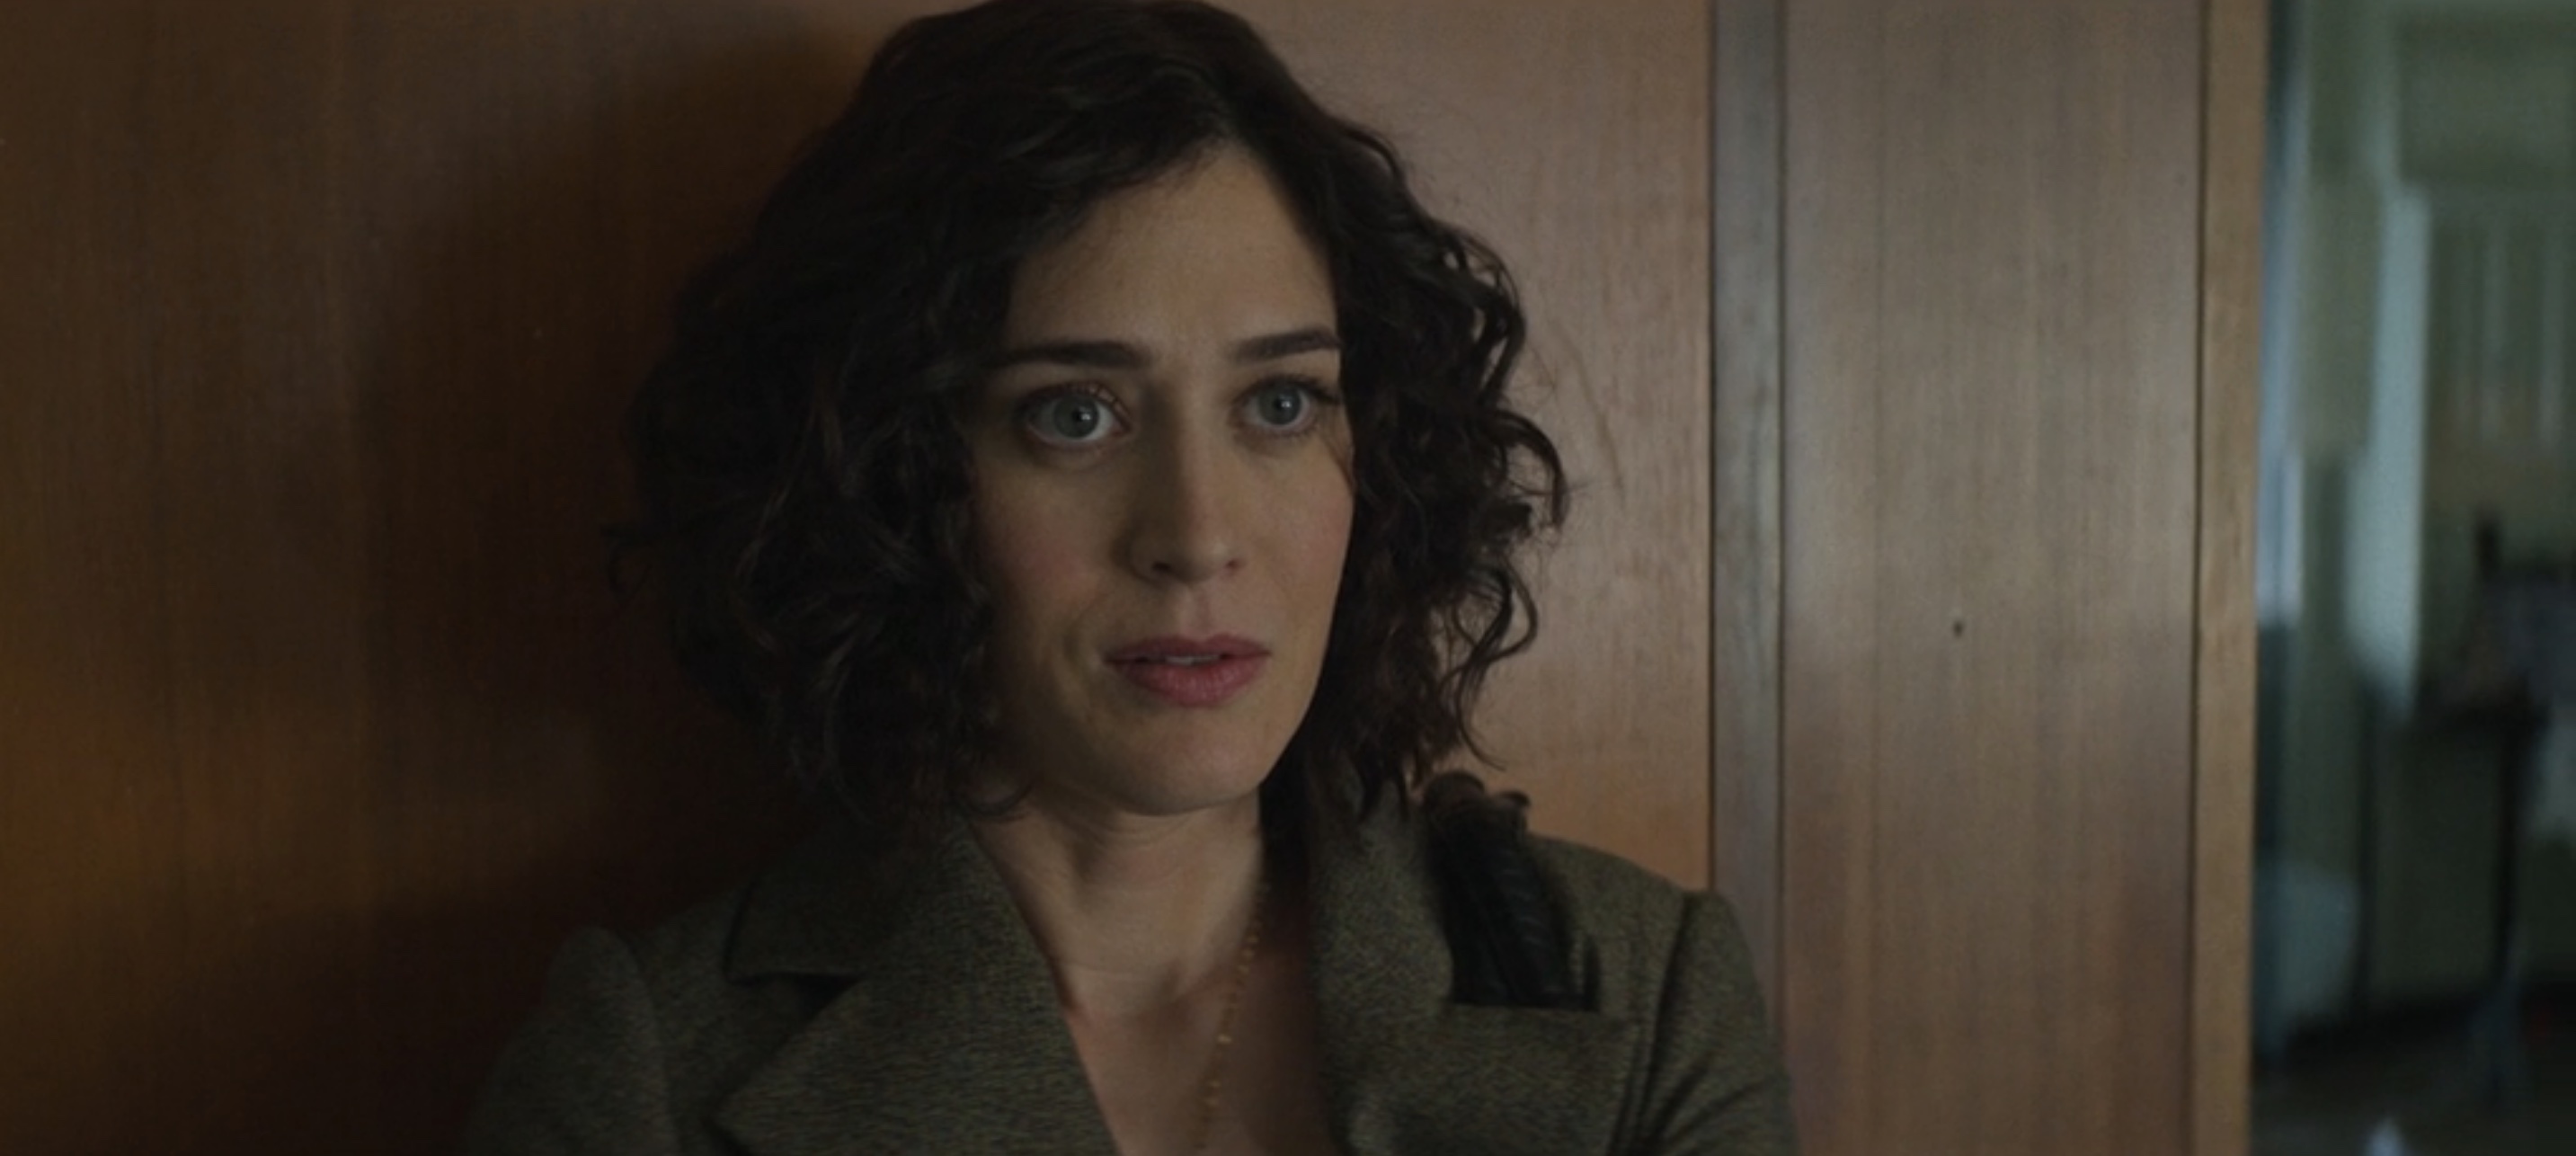 Fatal Attraction Cast on Paramount+ - Lizzy Caplan as Alex Forrest